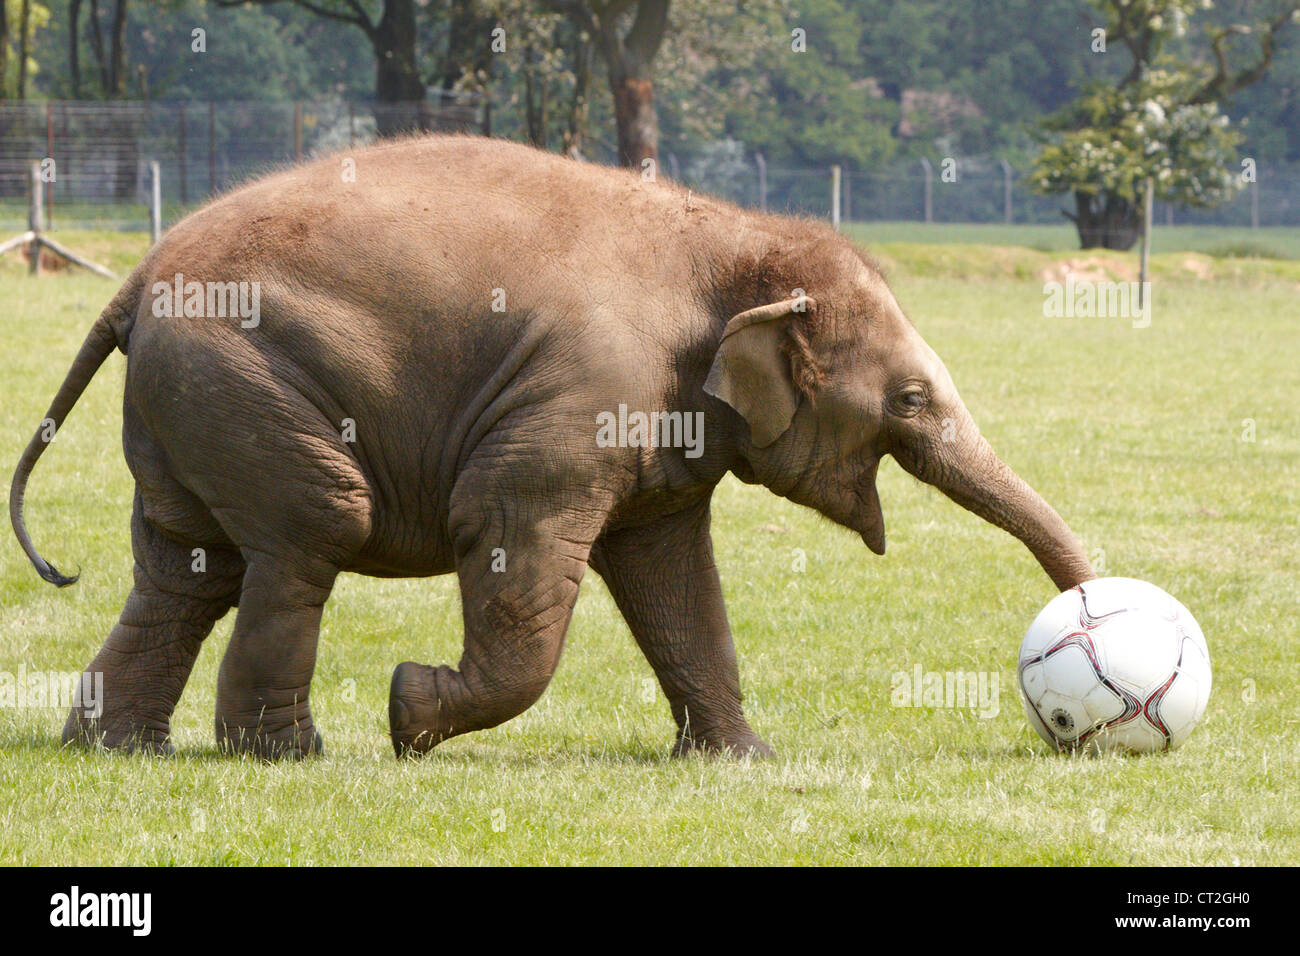 Three year old Asian elephant Donna plays with a giant football provided by her keepers at ZSL Whipsnade zoo. Stock Photo